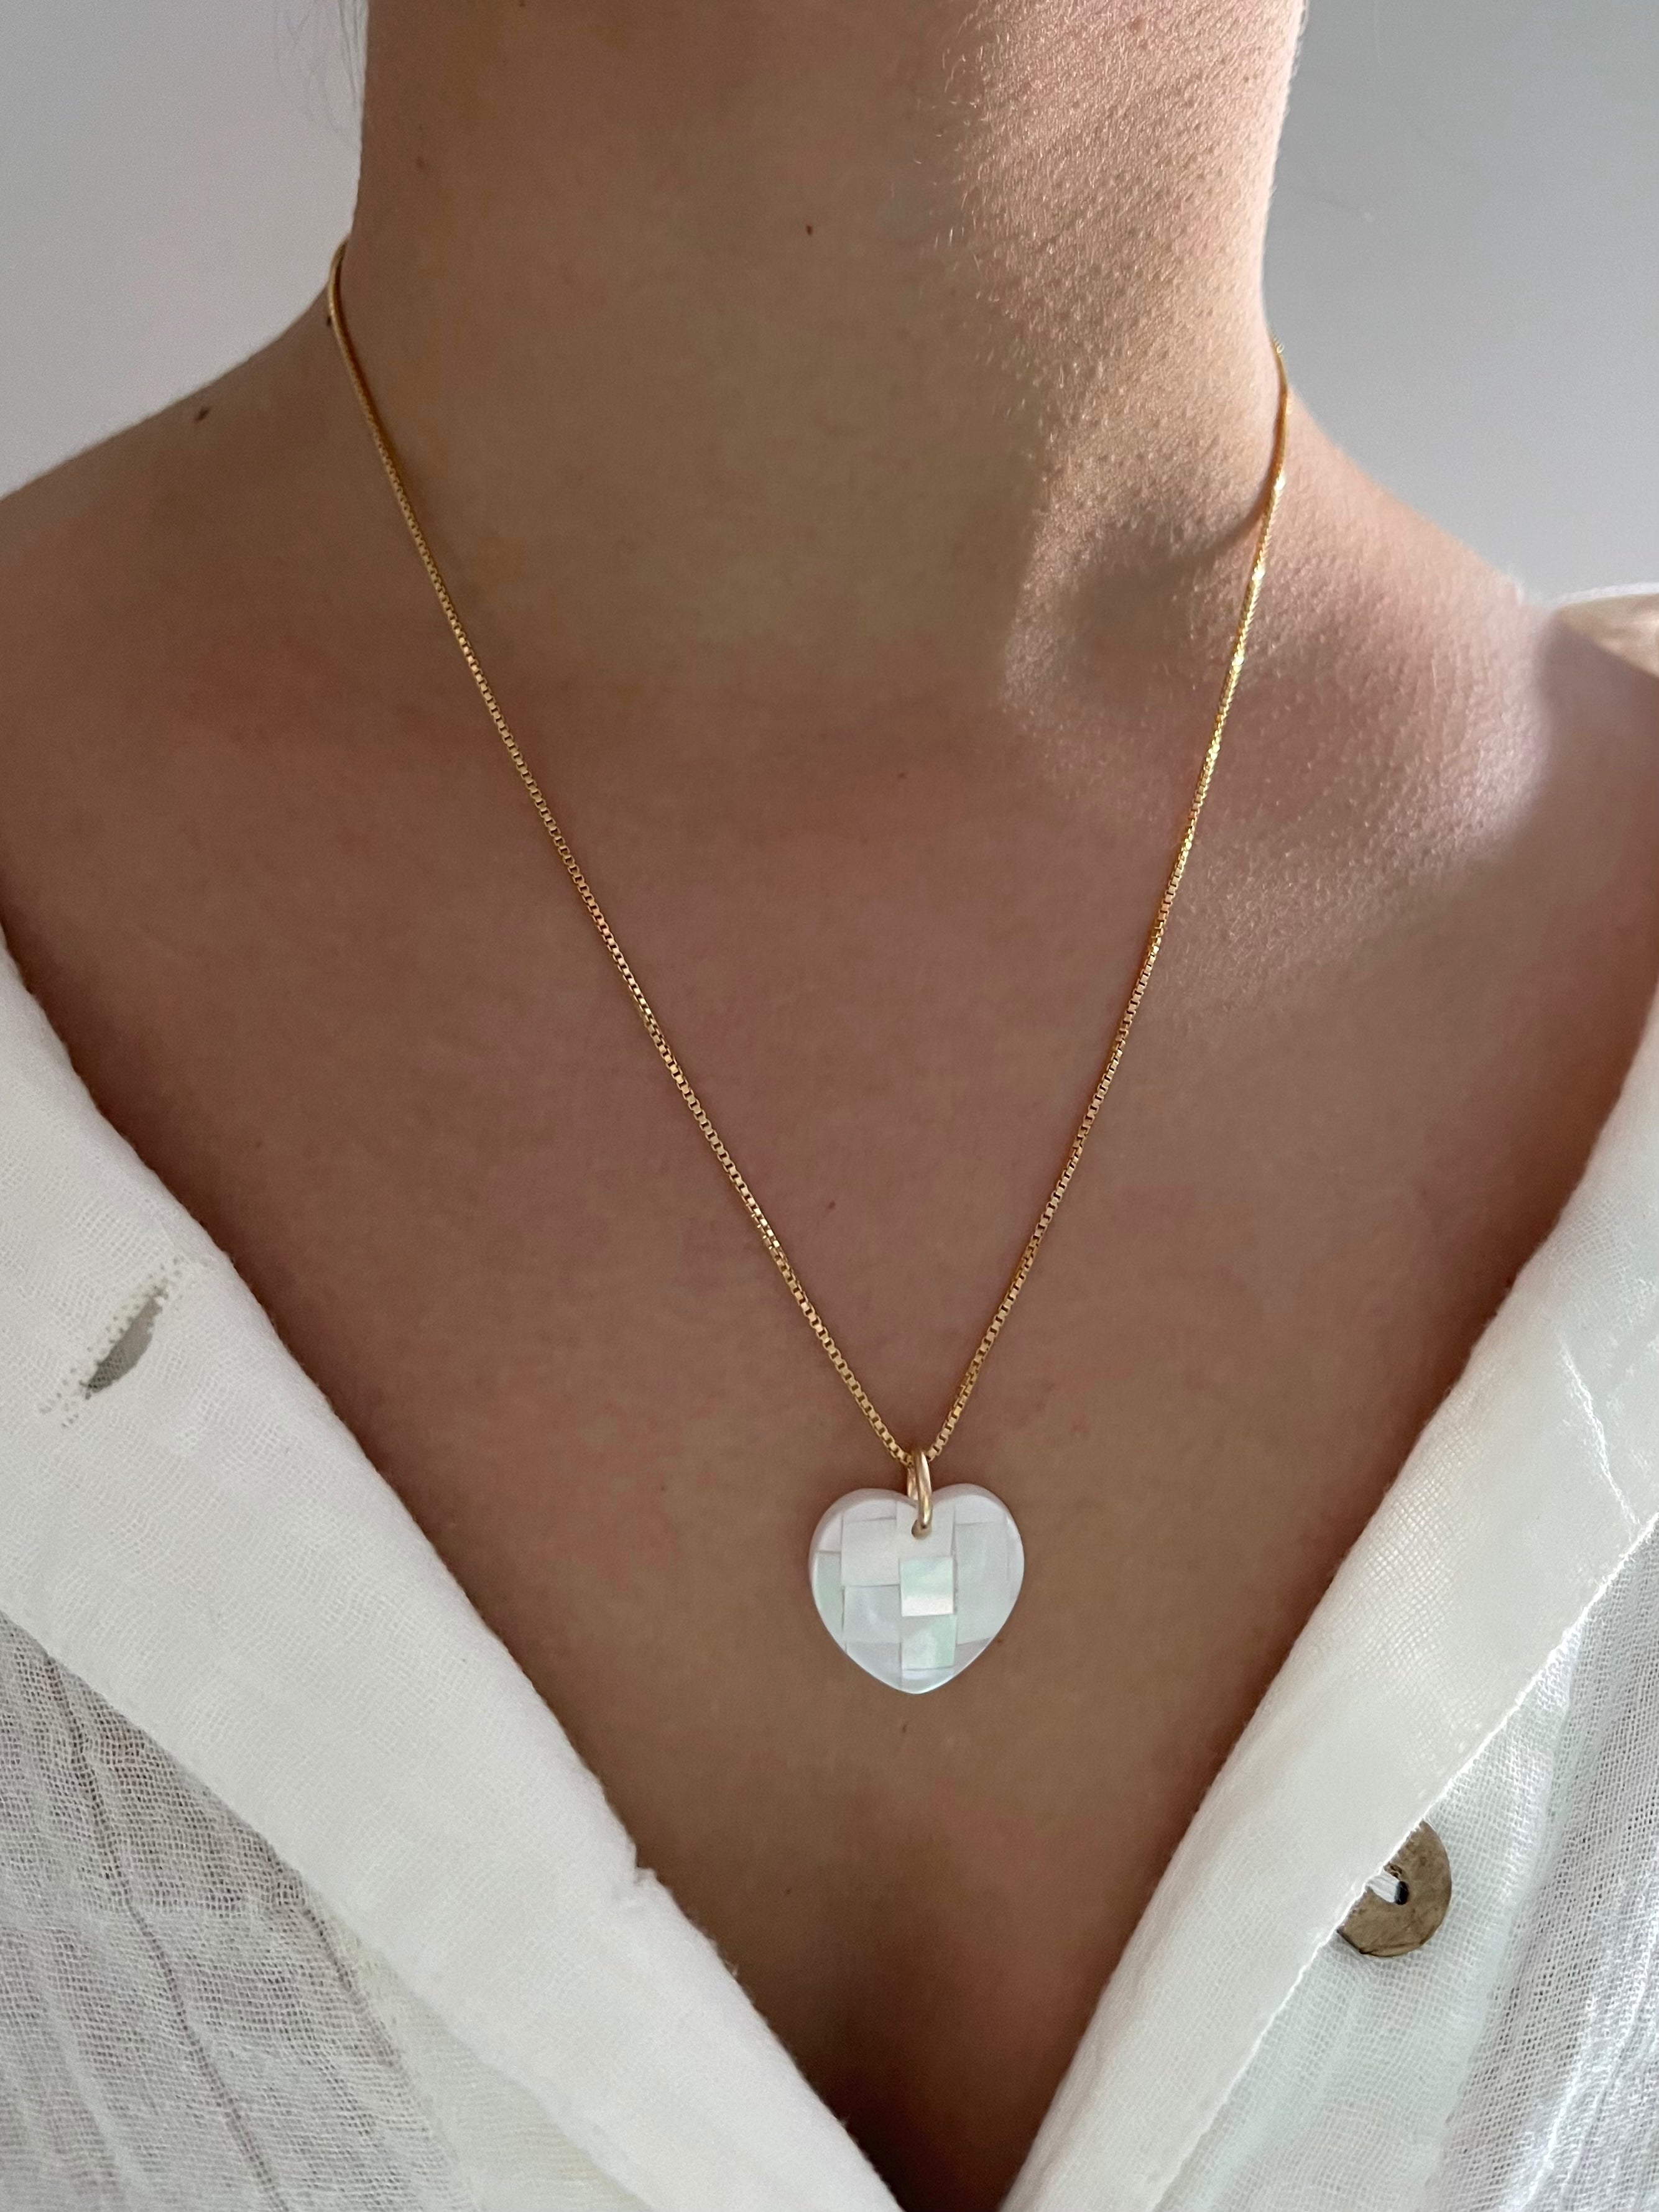 YESLOVE DISCO CAL HEART NECKLACE